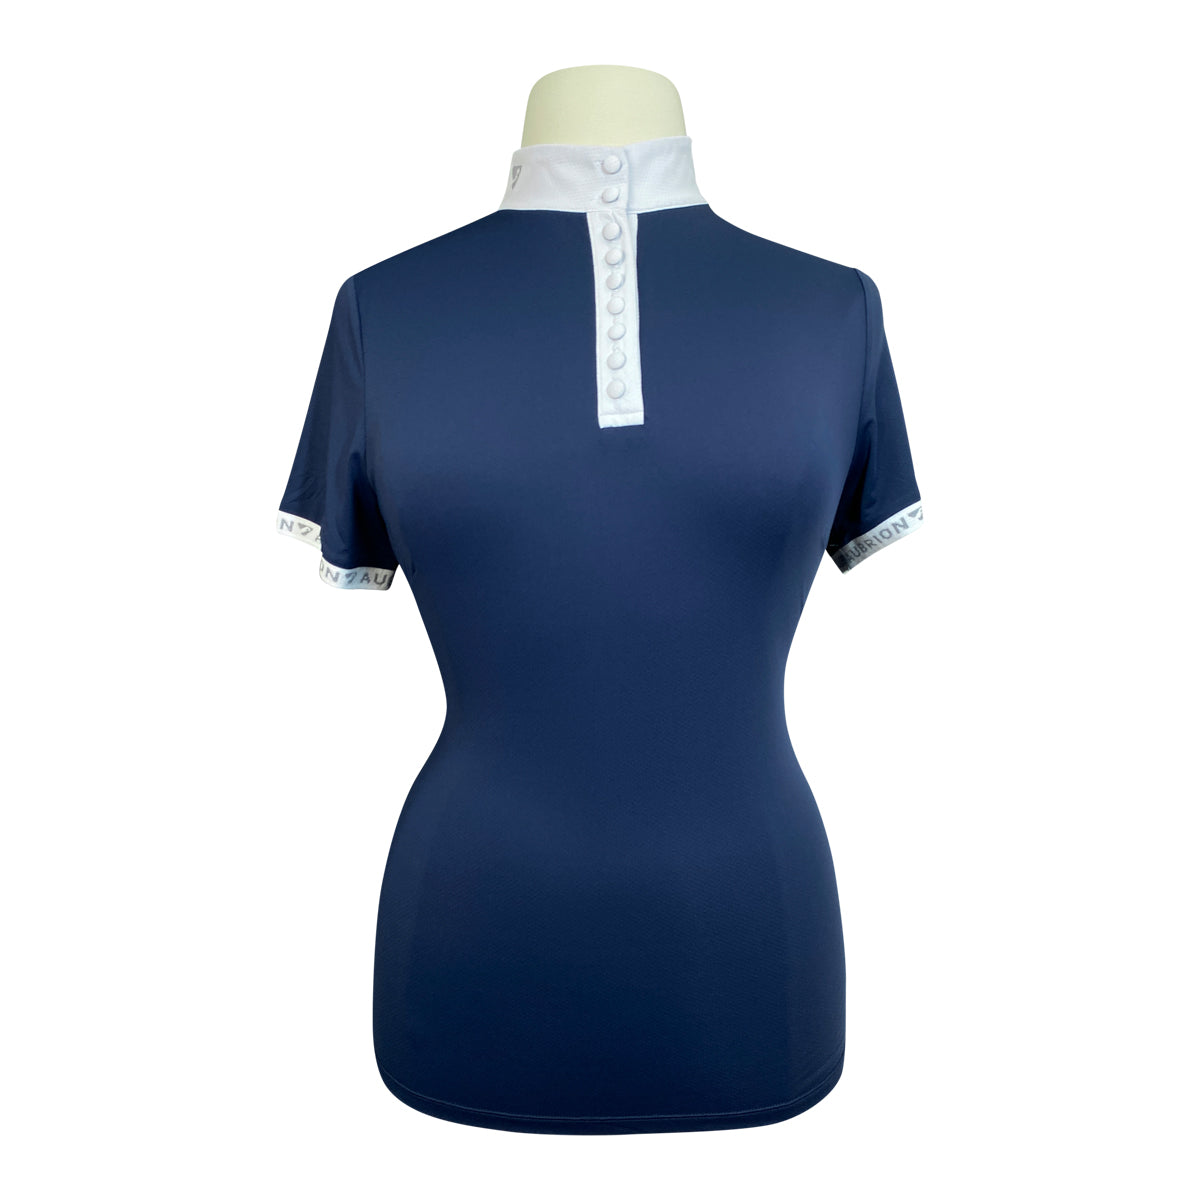 Aubrion Chester Show Shirt in Navy Blue